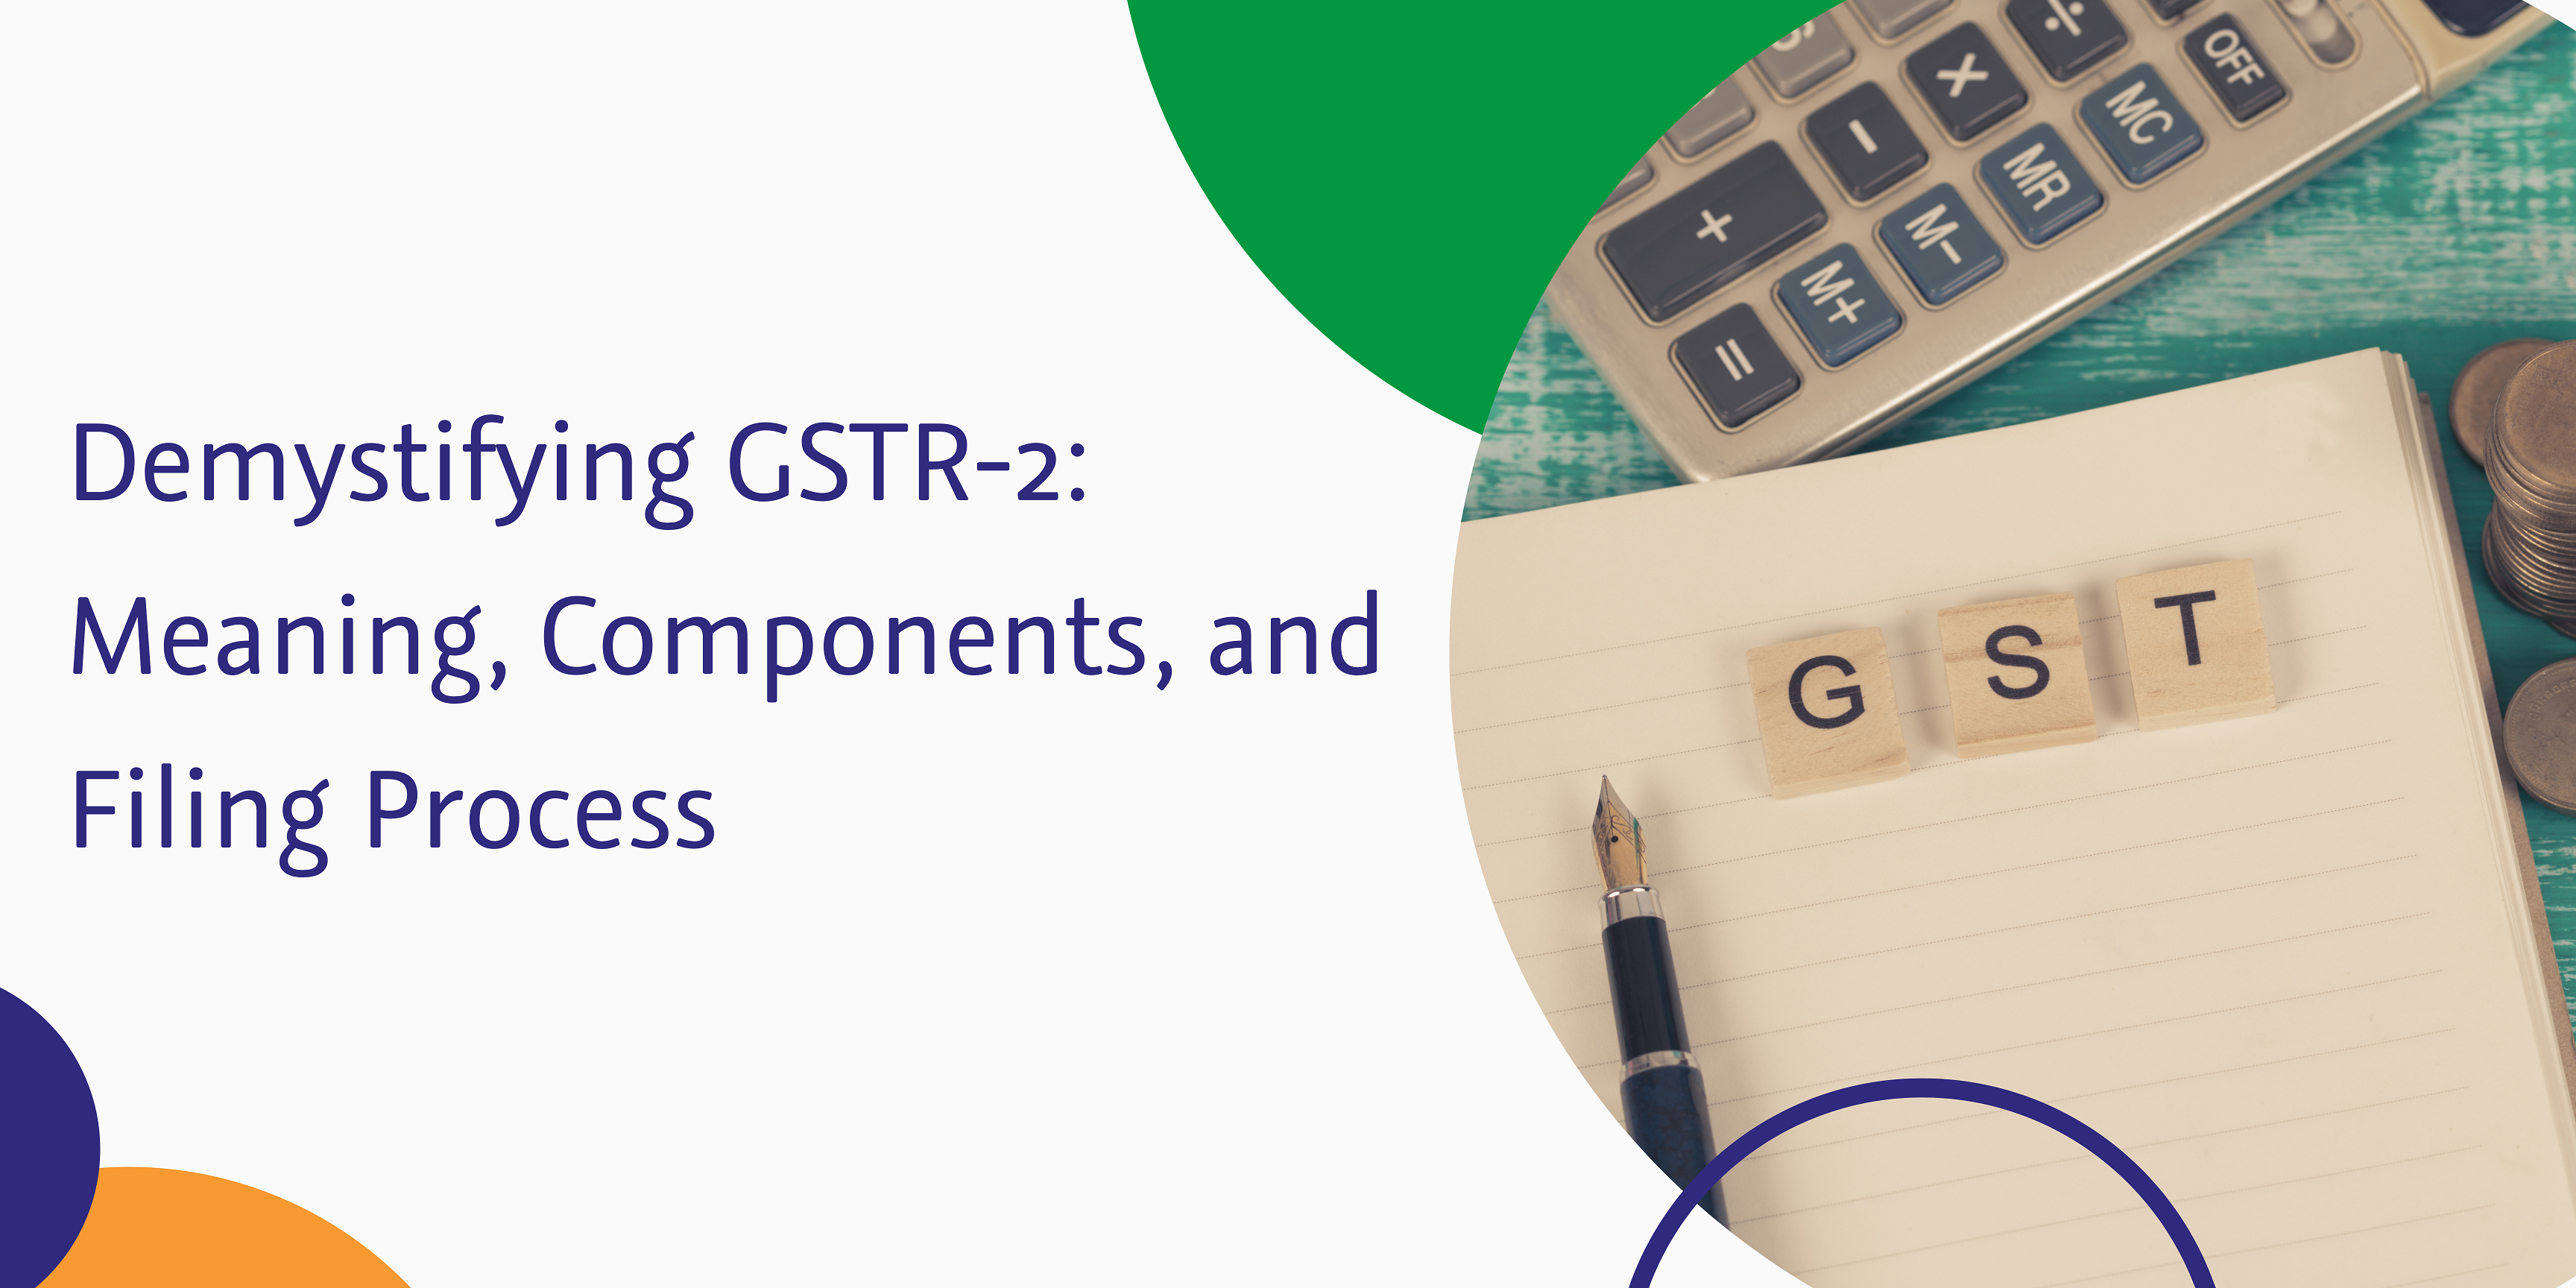 demystifying gstr-2 meaning components and filing process